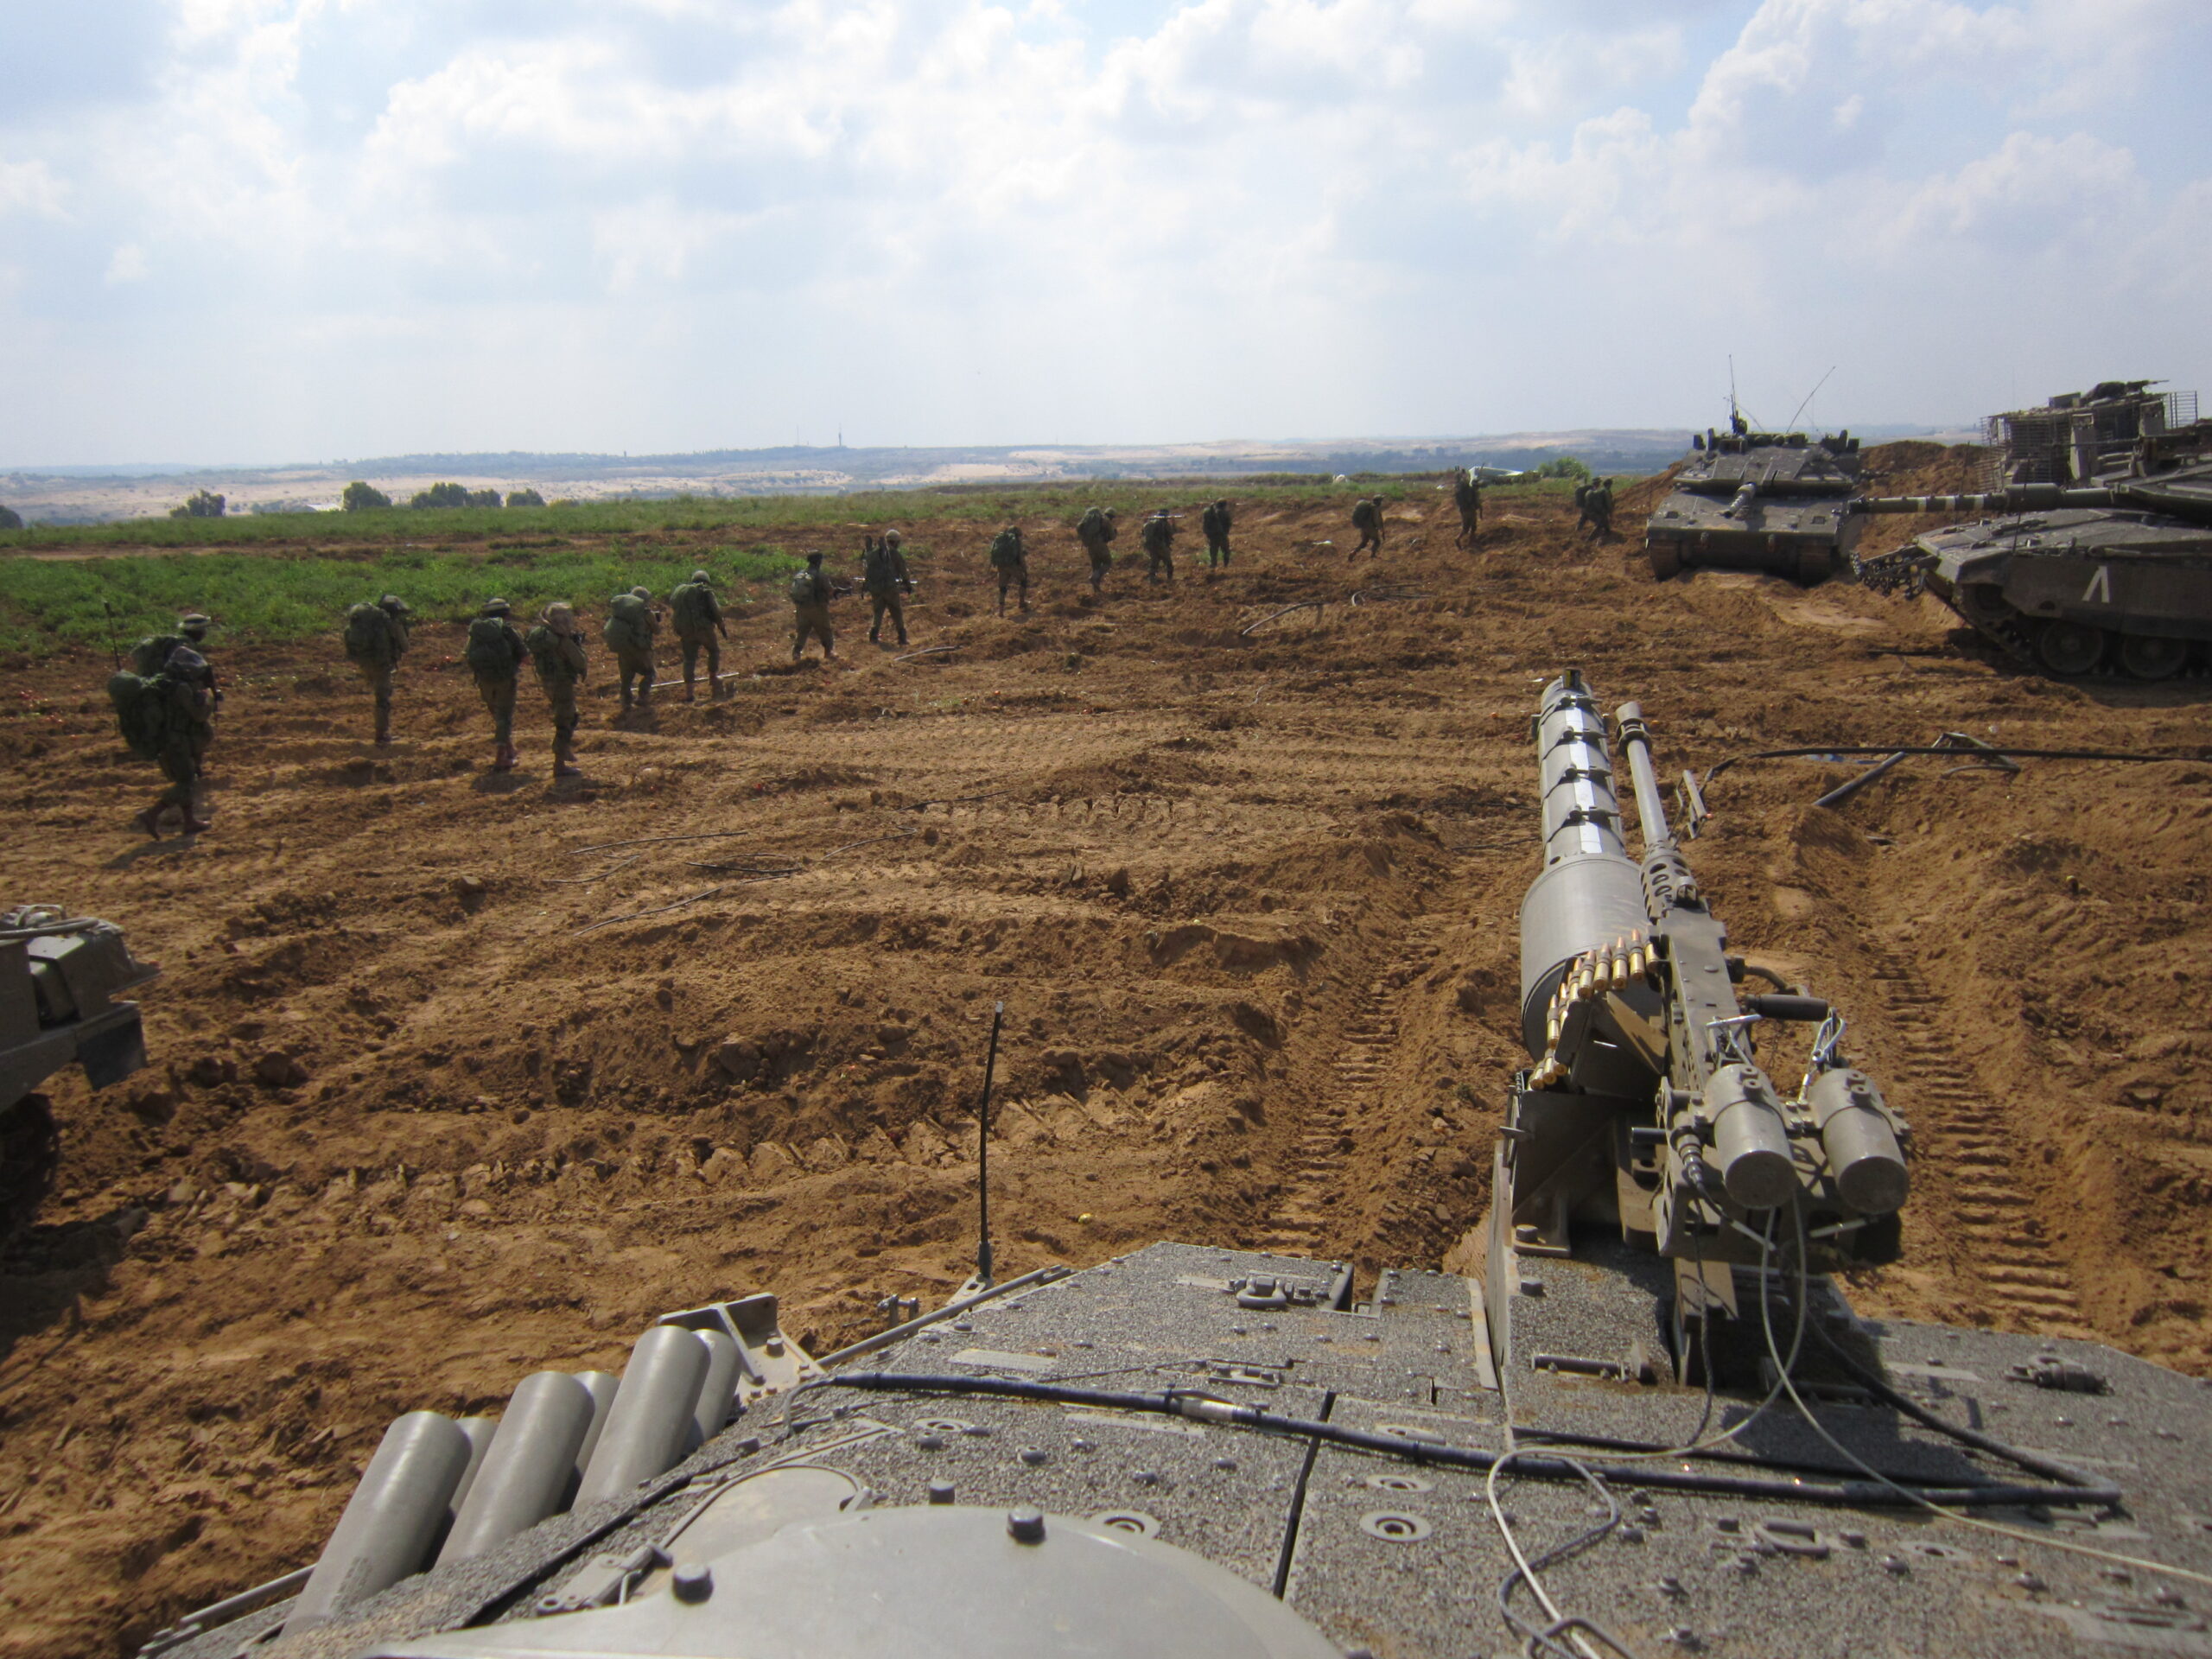 Armored_Corps_Operate_Near_the_Gaza_Border_14754144934-scaled.jpg